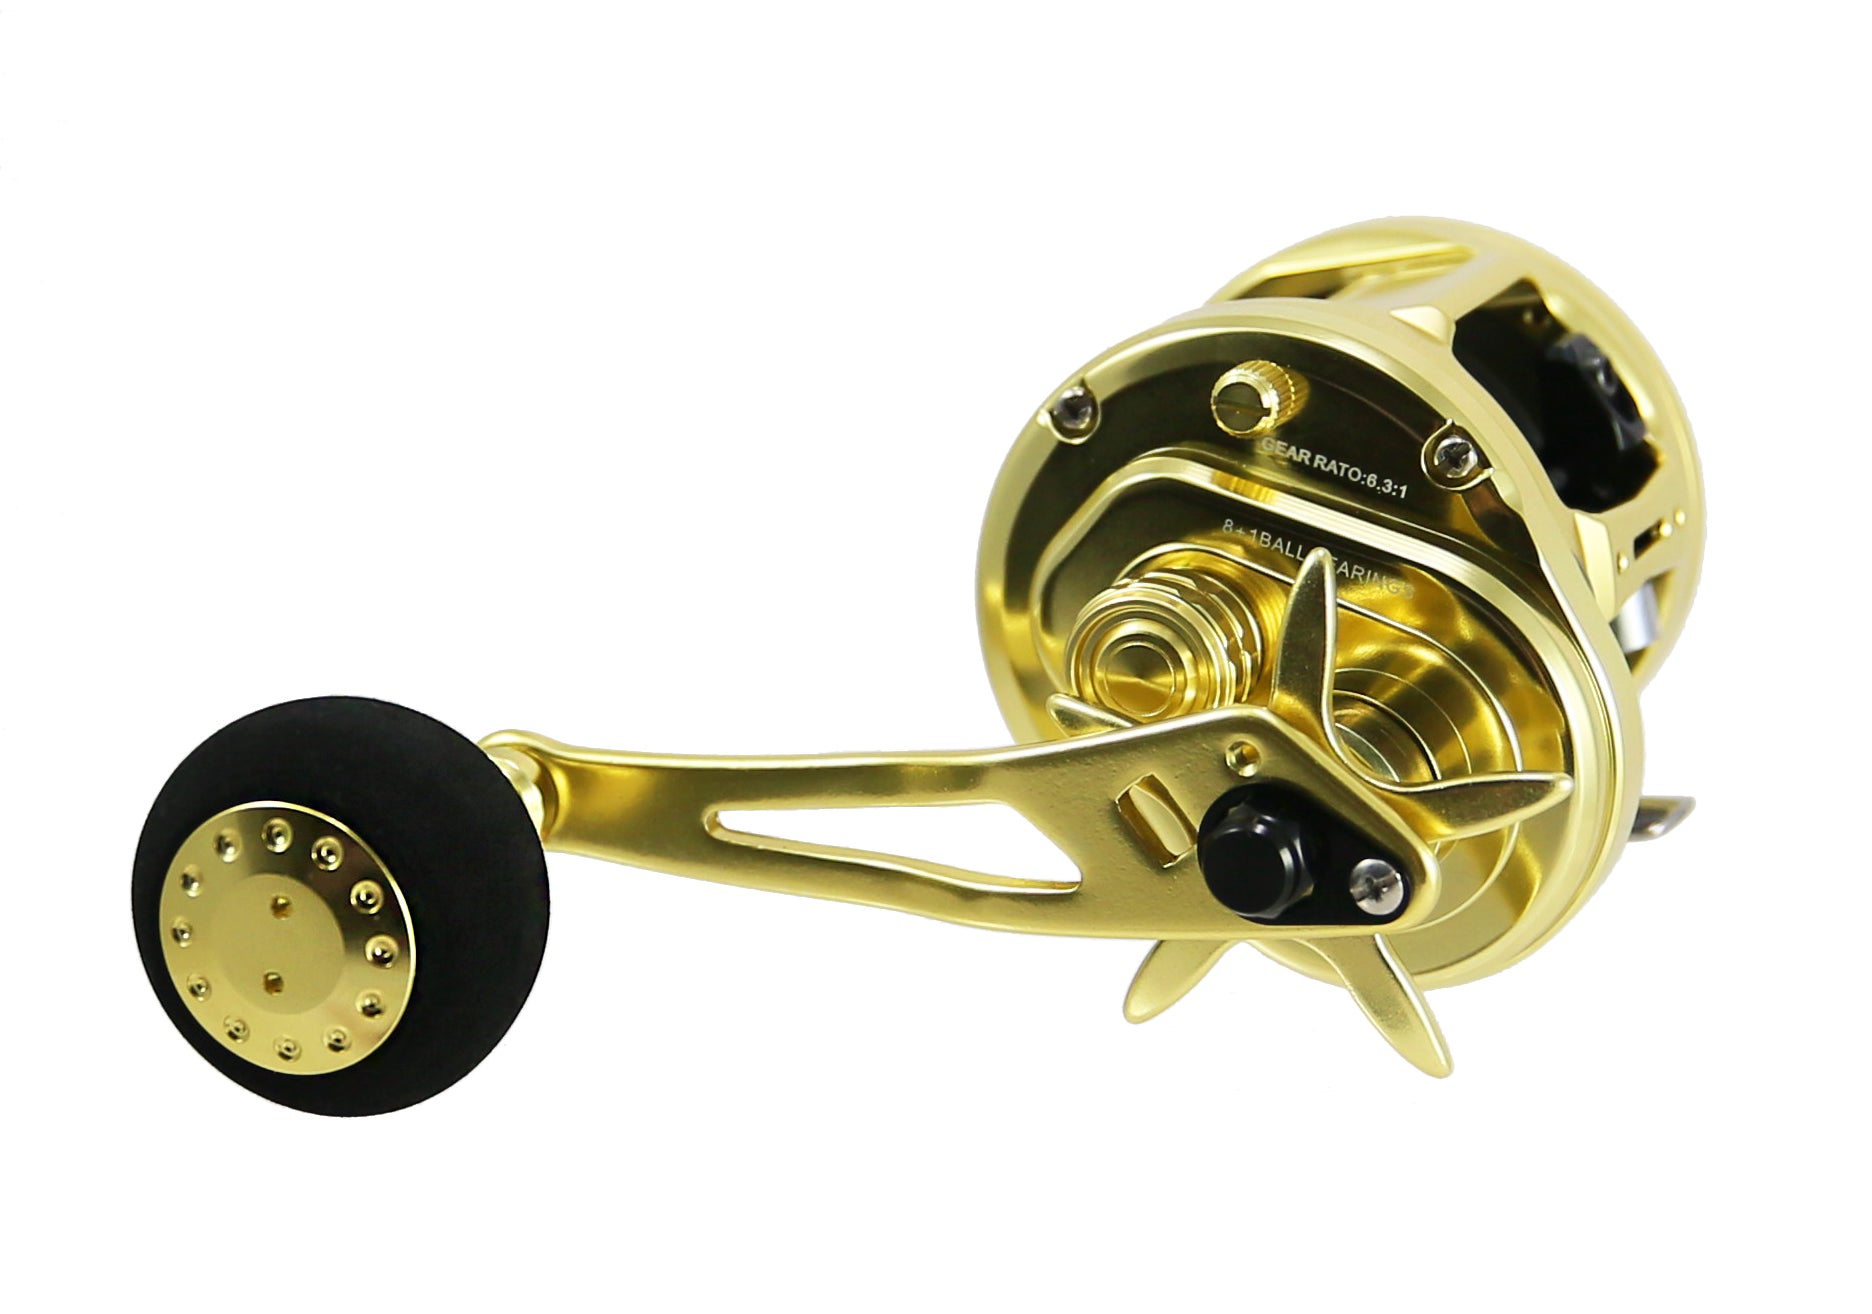 Alutecnos Saltwater Fly Reel 12 Weight Gold